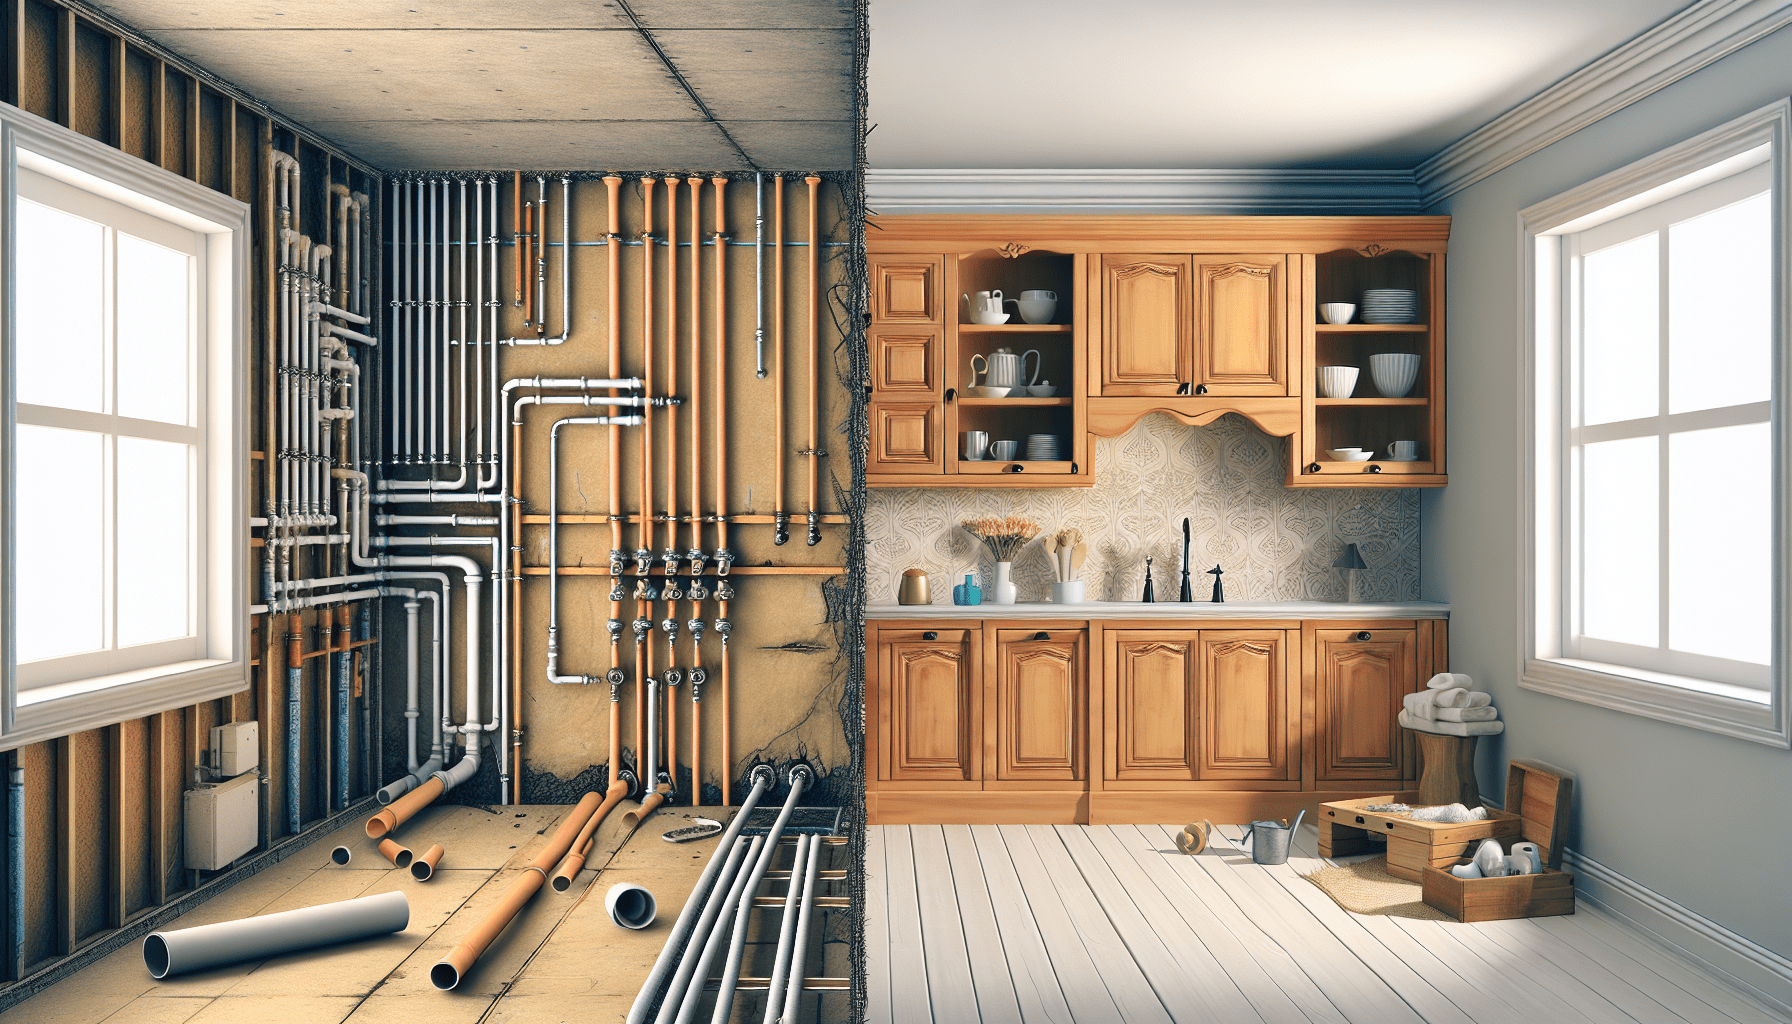 Do You Do Plumbing Before Or After Cabinets?